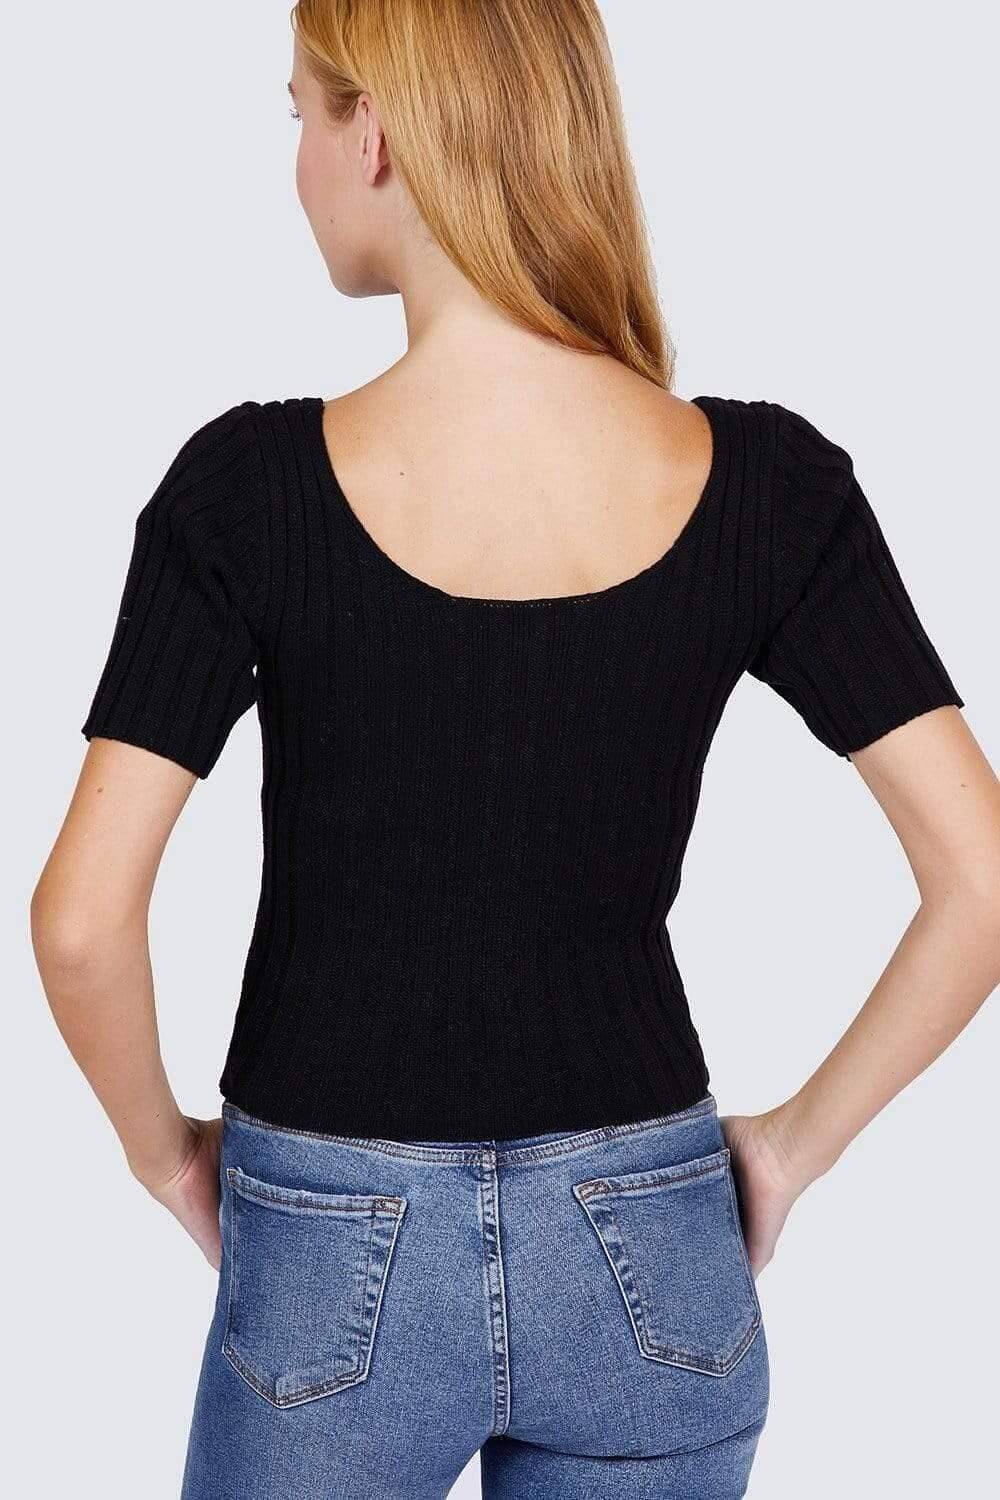 Black Short Sleeve Rib Knitted Sweater - Shopping Therapy Top